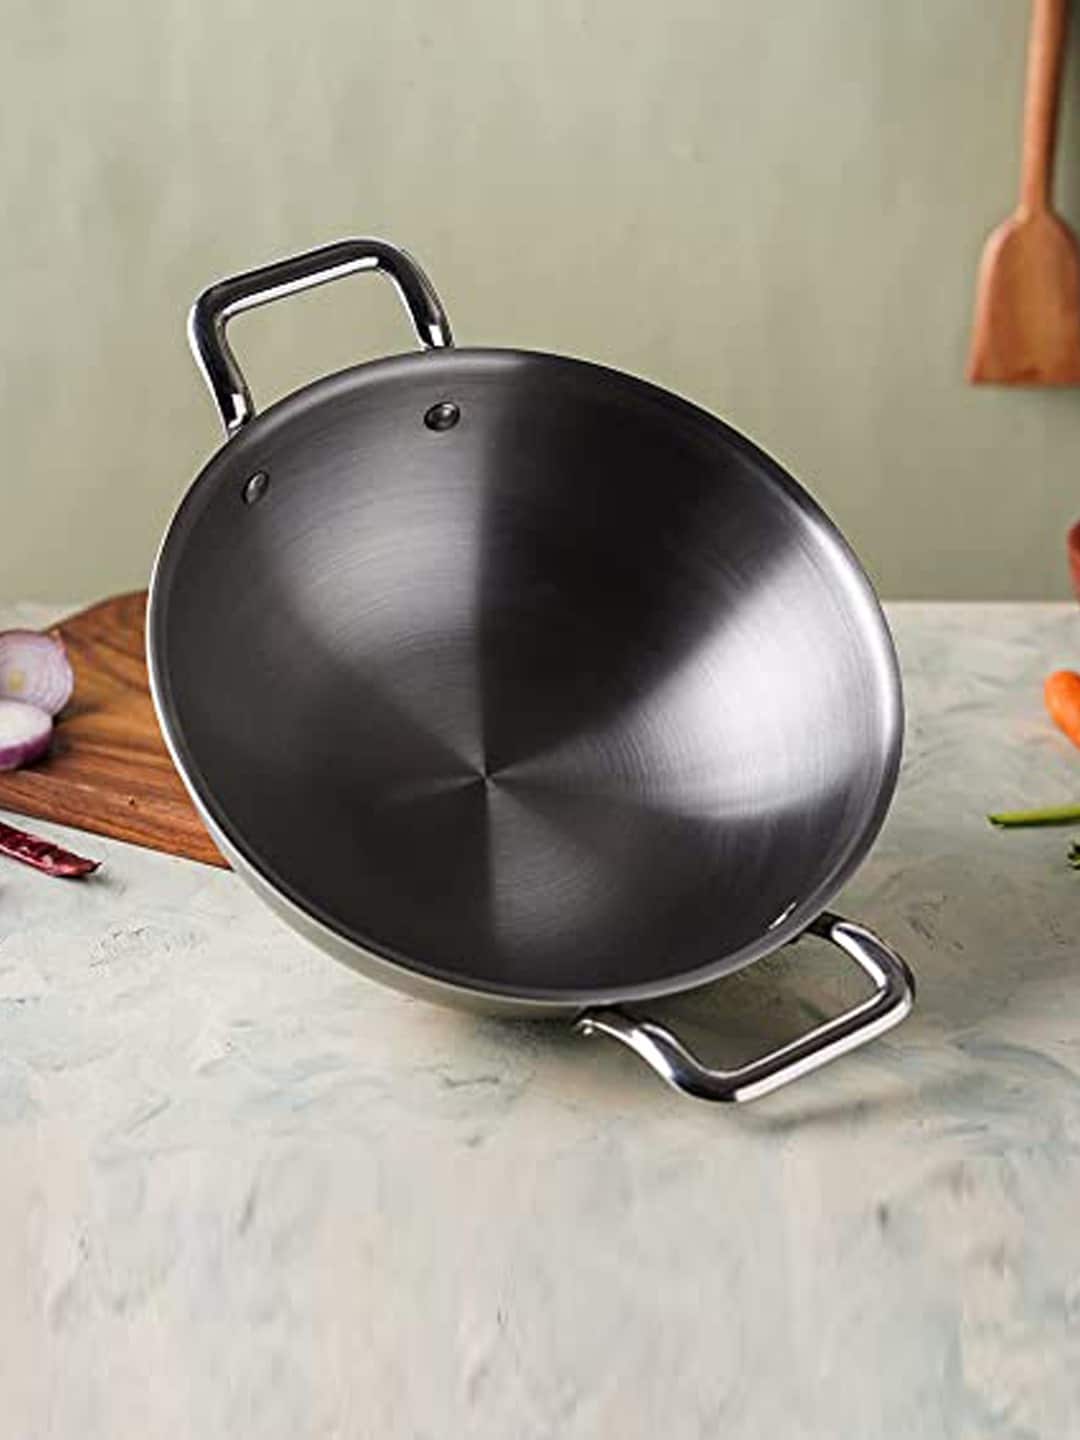 The Indus Valley Stainless-Steel Kadai Price in India